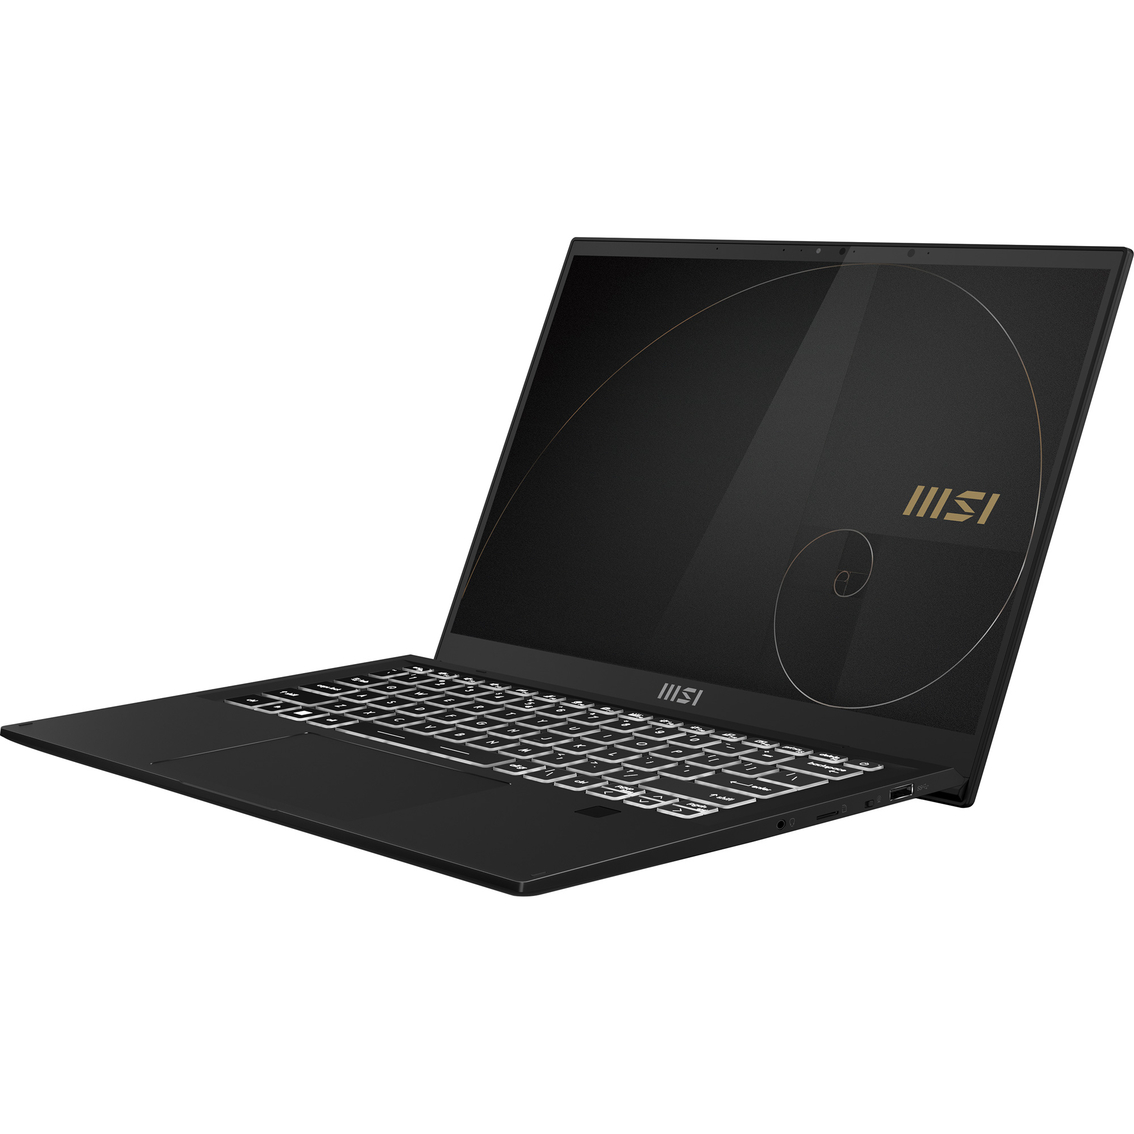 Military/Veterans: Save $300 on MSI Summit E14 Flip Evo 14 in. Intel Core i5 1.7GHz 16GB RAM 512GB SSD Touch Laptop ($1,199.00) $1199